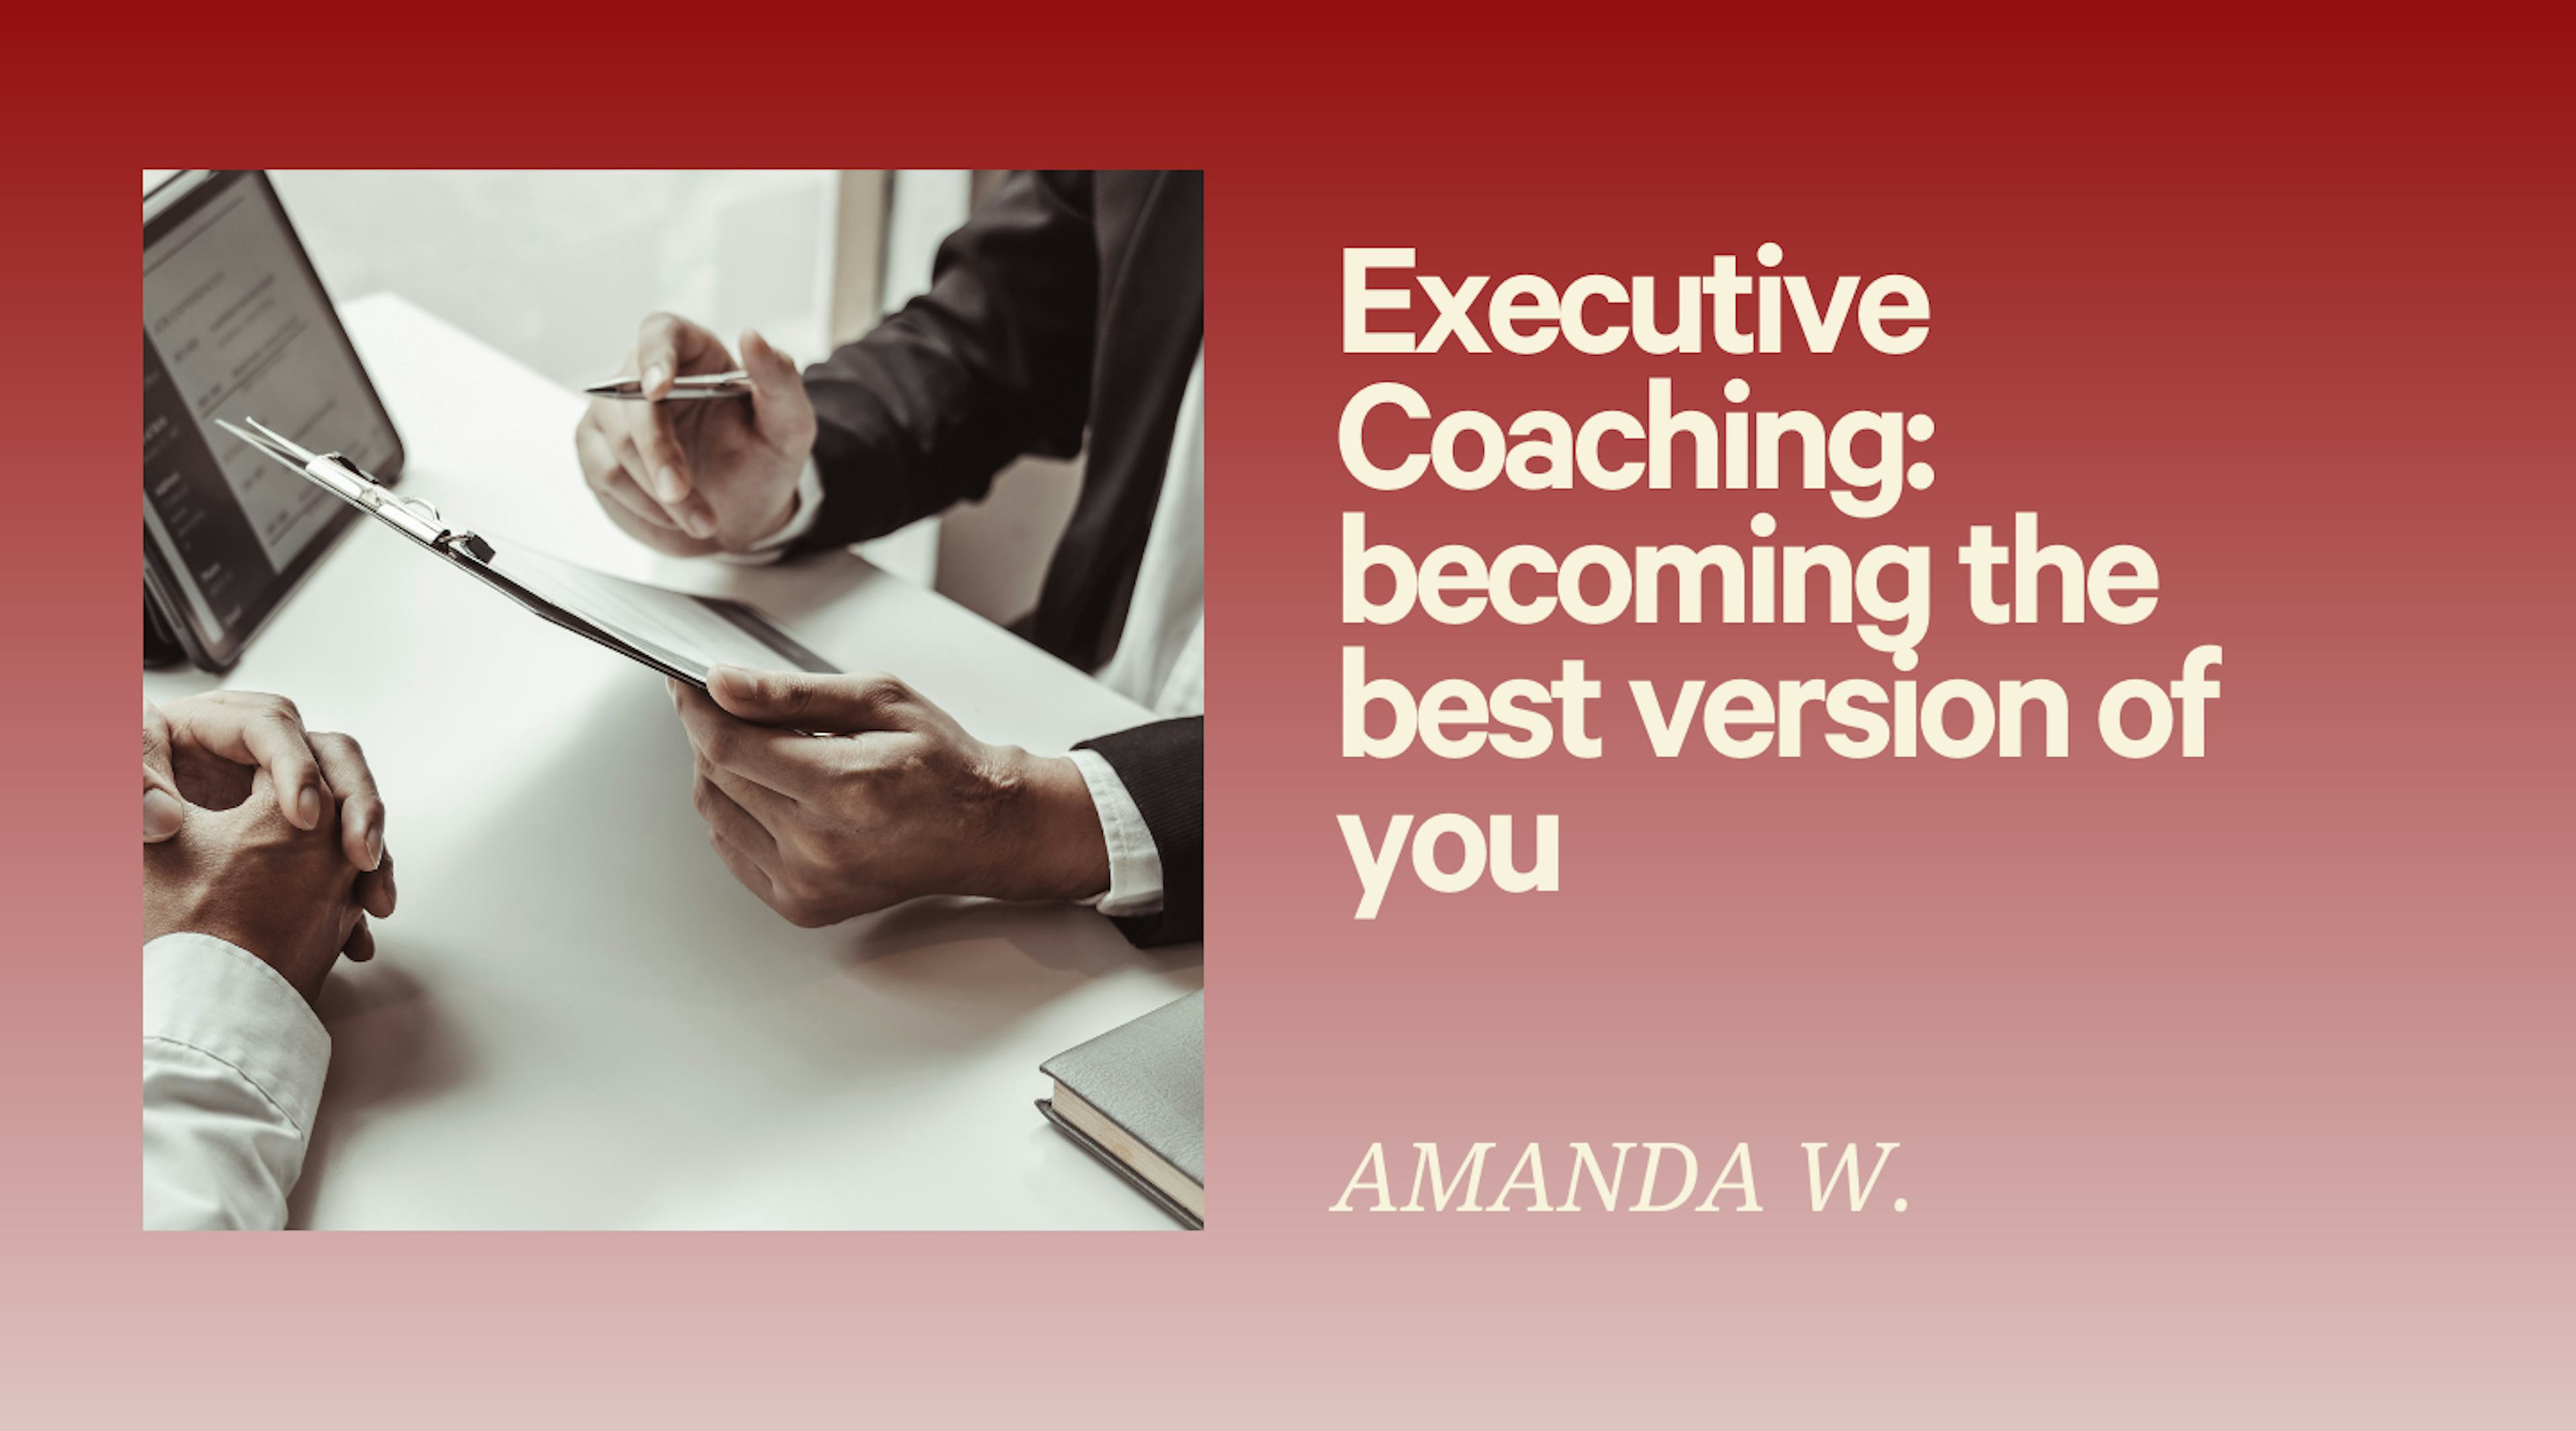 Executive and Career Coaching: becoming the best version of you